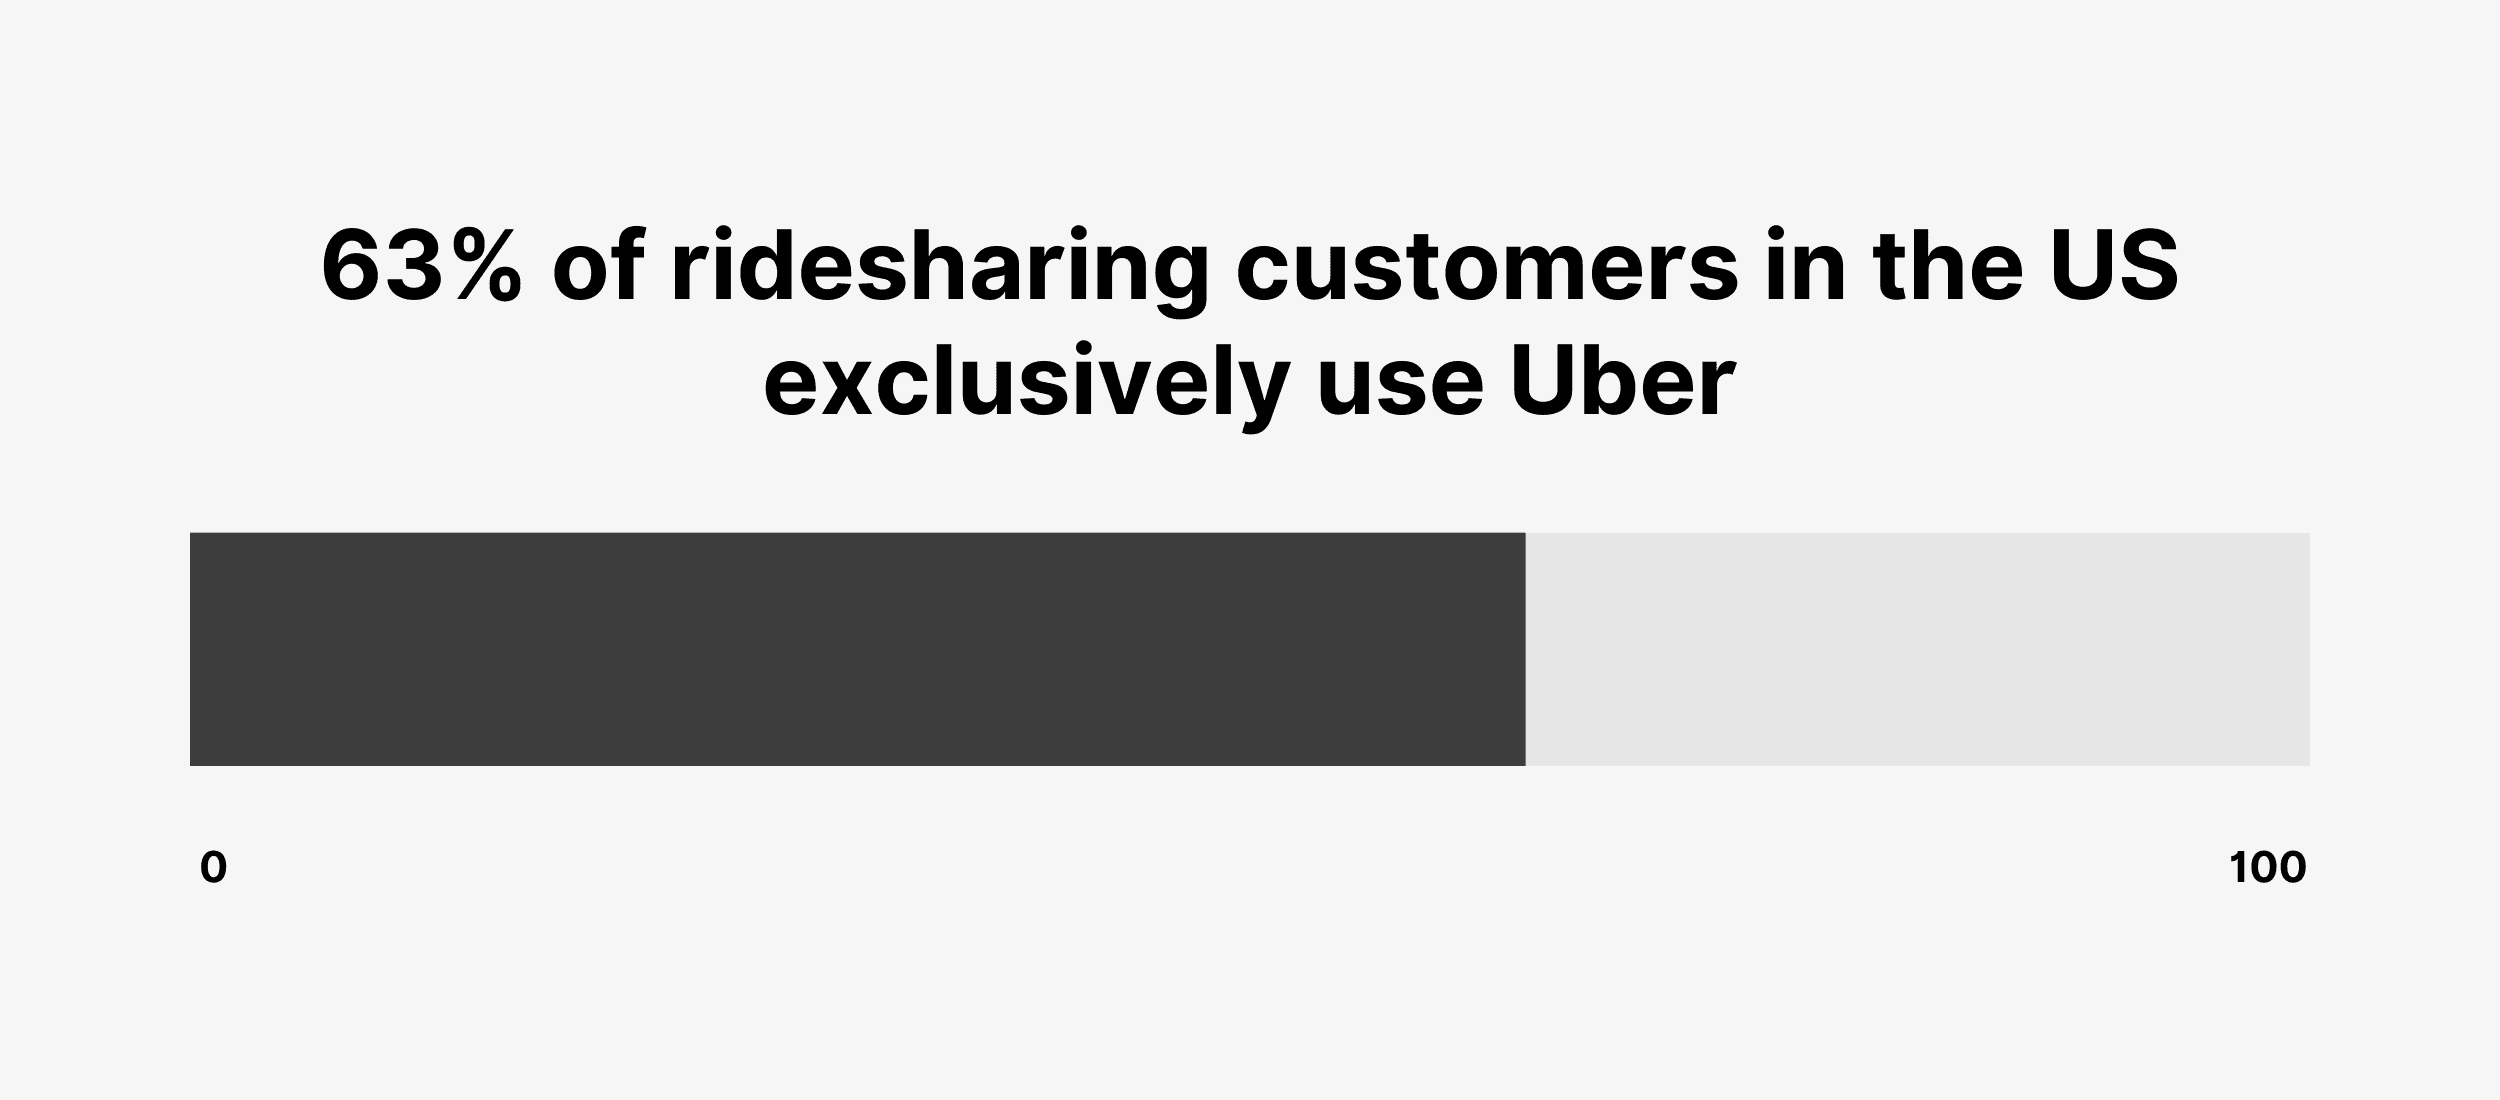 63% of ridesharing customers in the US exclusively use Uber